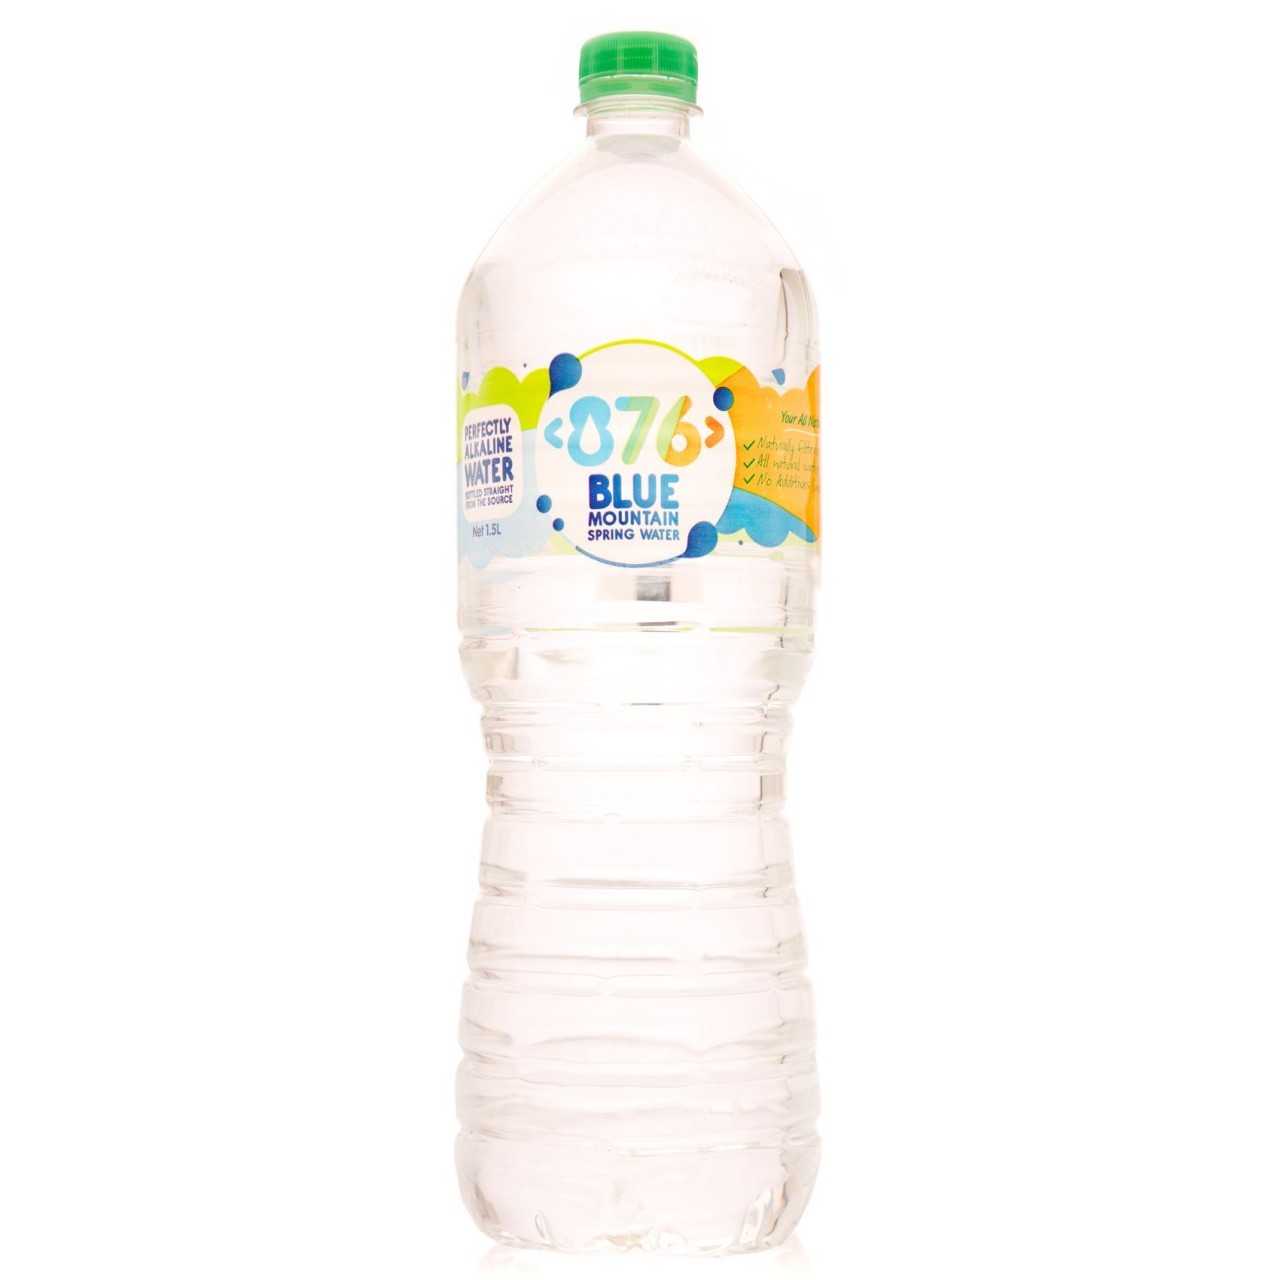 876 SPRING WATER 1.5L